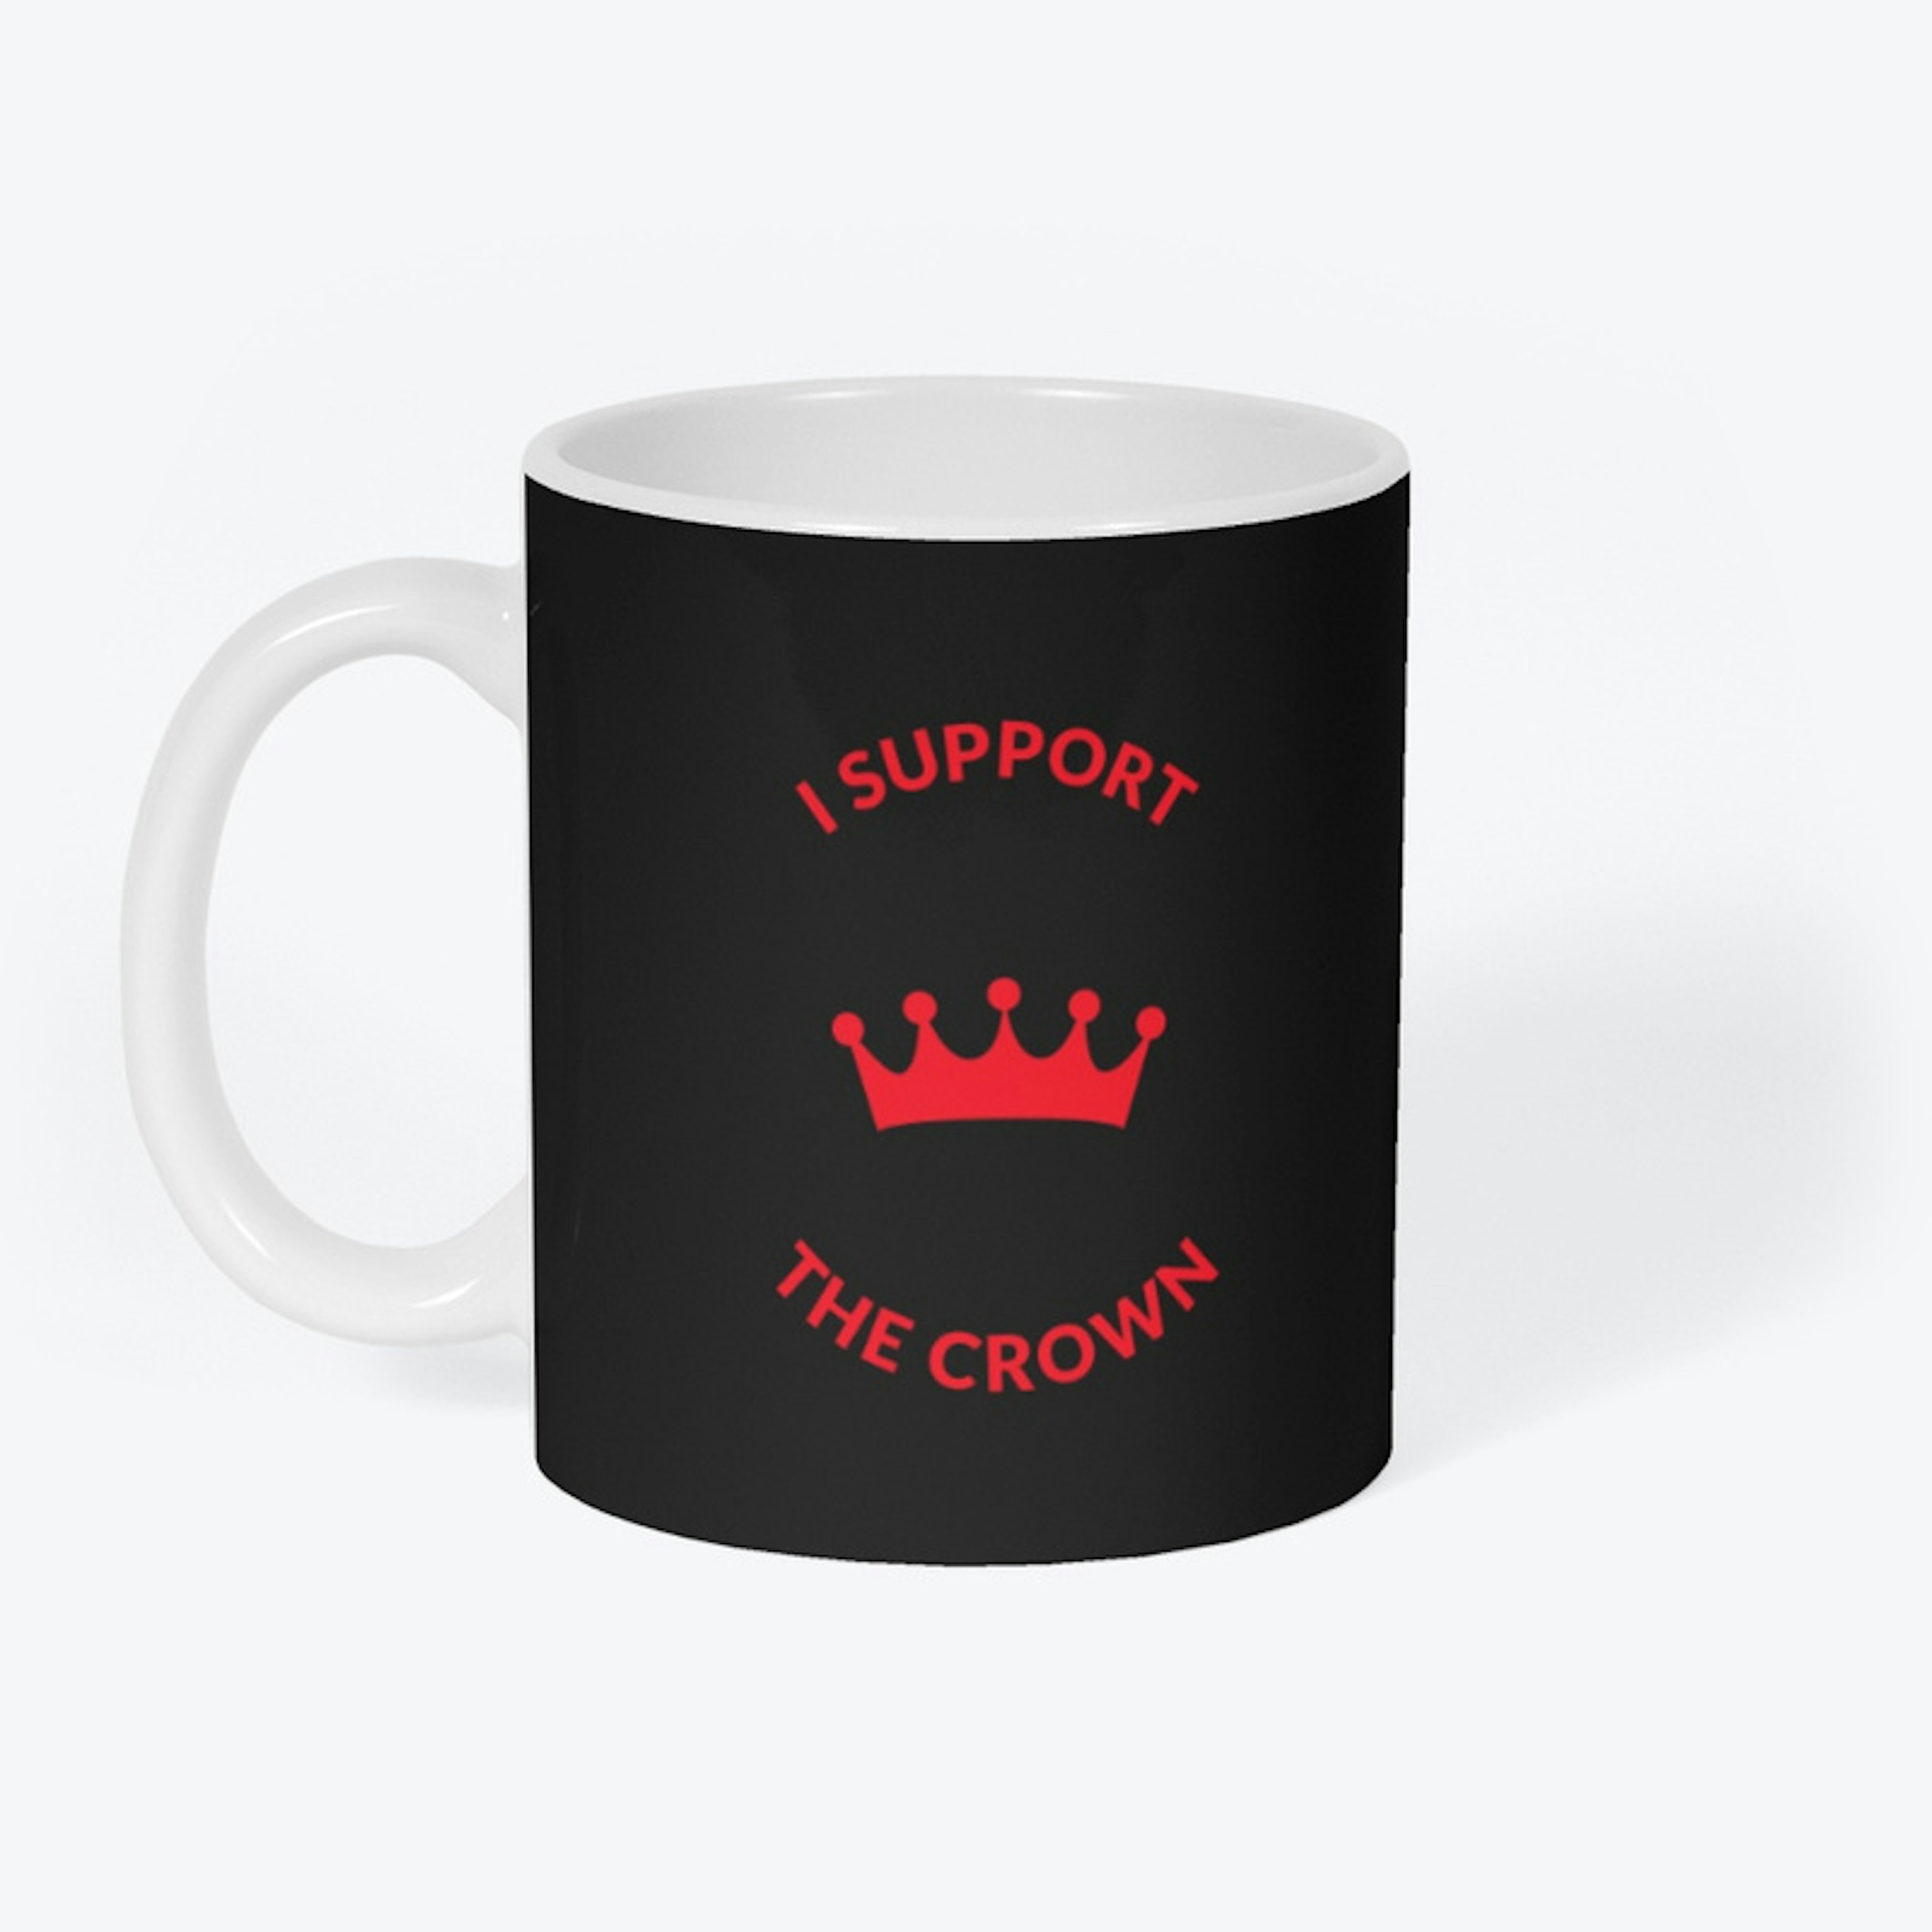 Support The Crown mug_r